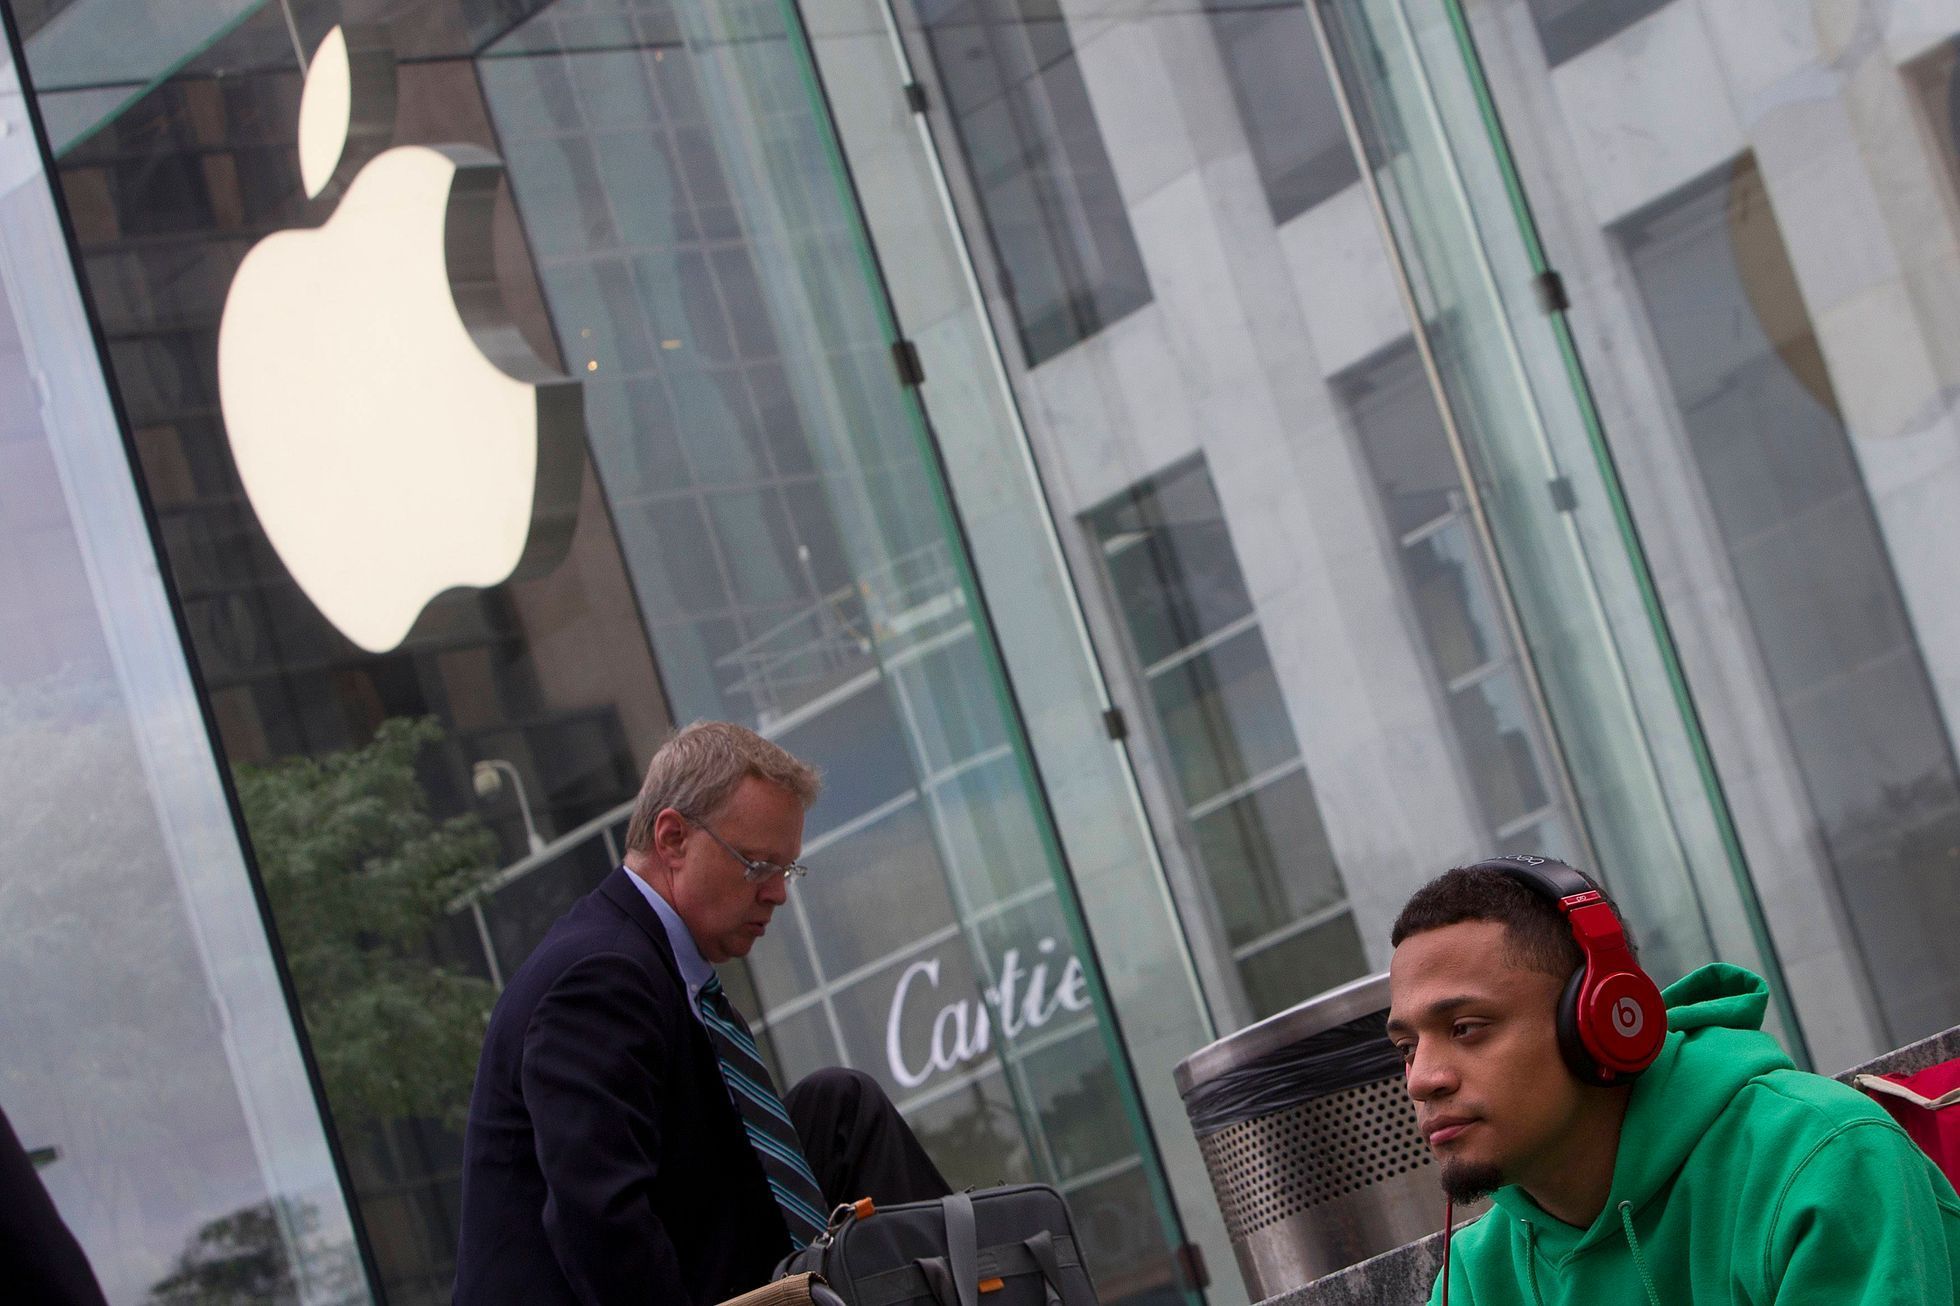 A man waits outside the Apple Store in advance of an Apple special event, in the Manhattan borough of New York